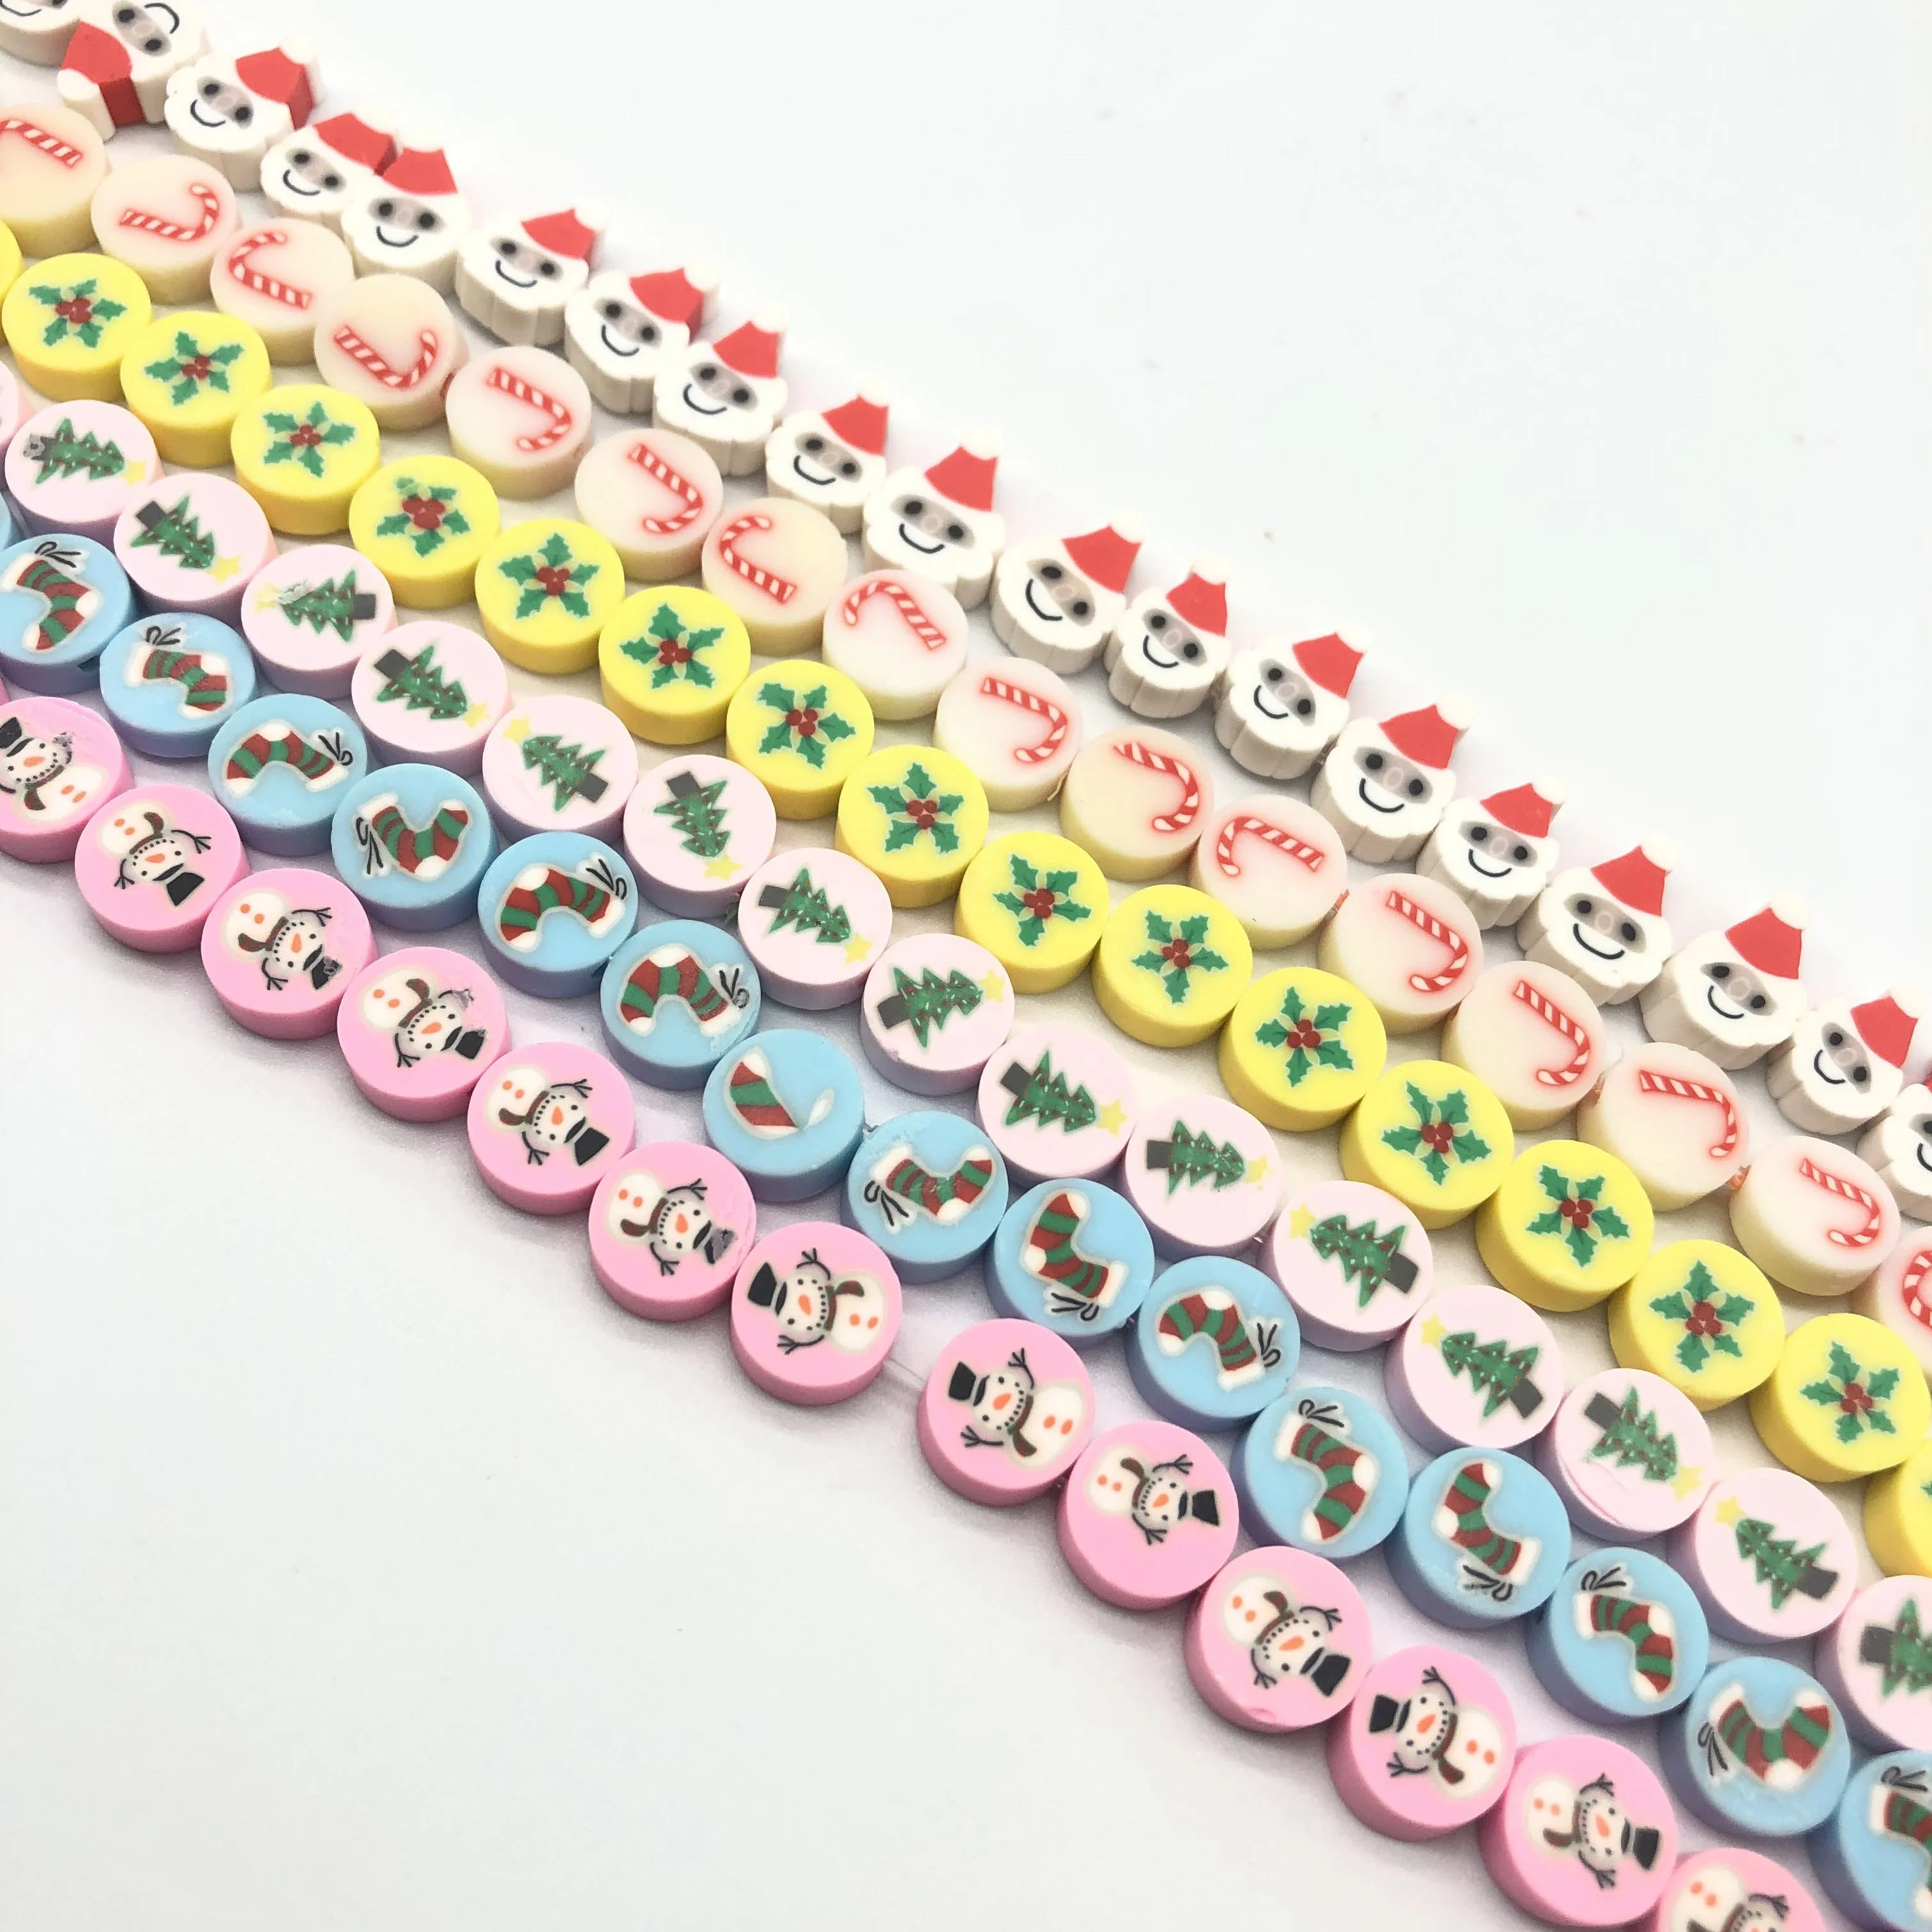 

Smile Sun flower Soft Pottery Ceramic Beads Polymer Clay Beads For Jewelry Making And Kid's DIY, Rich and colorful